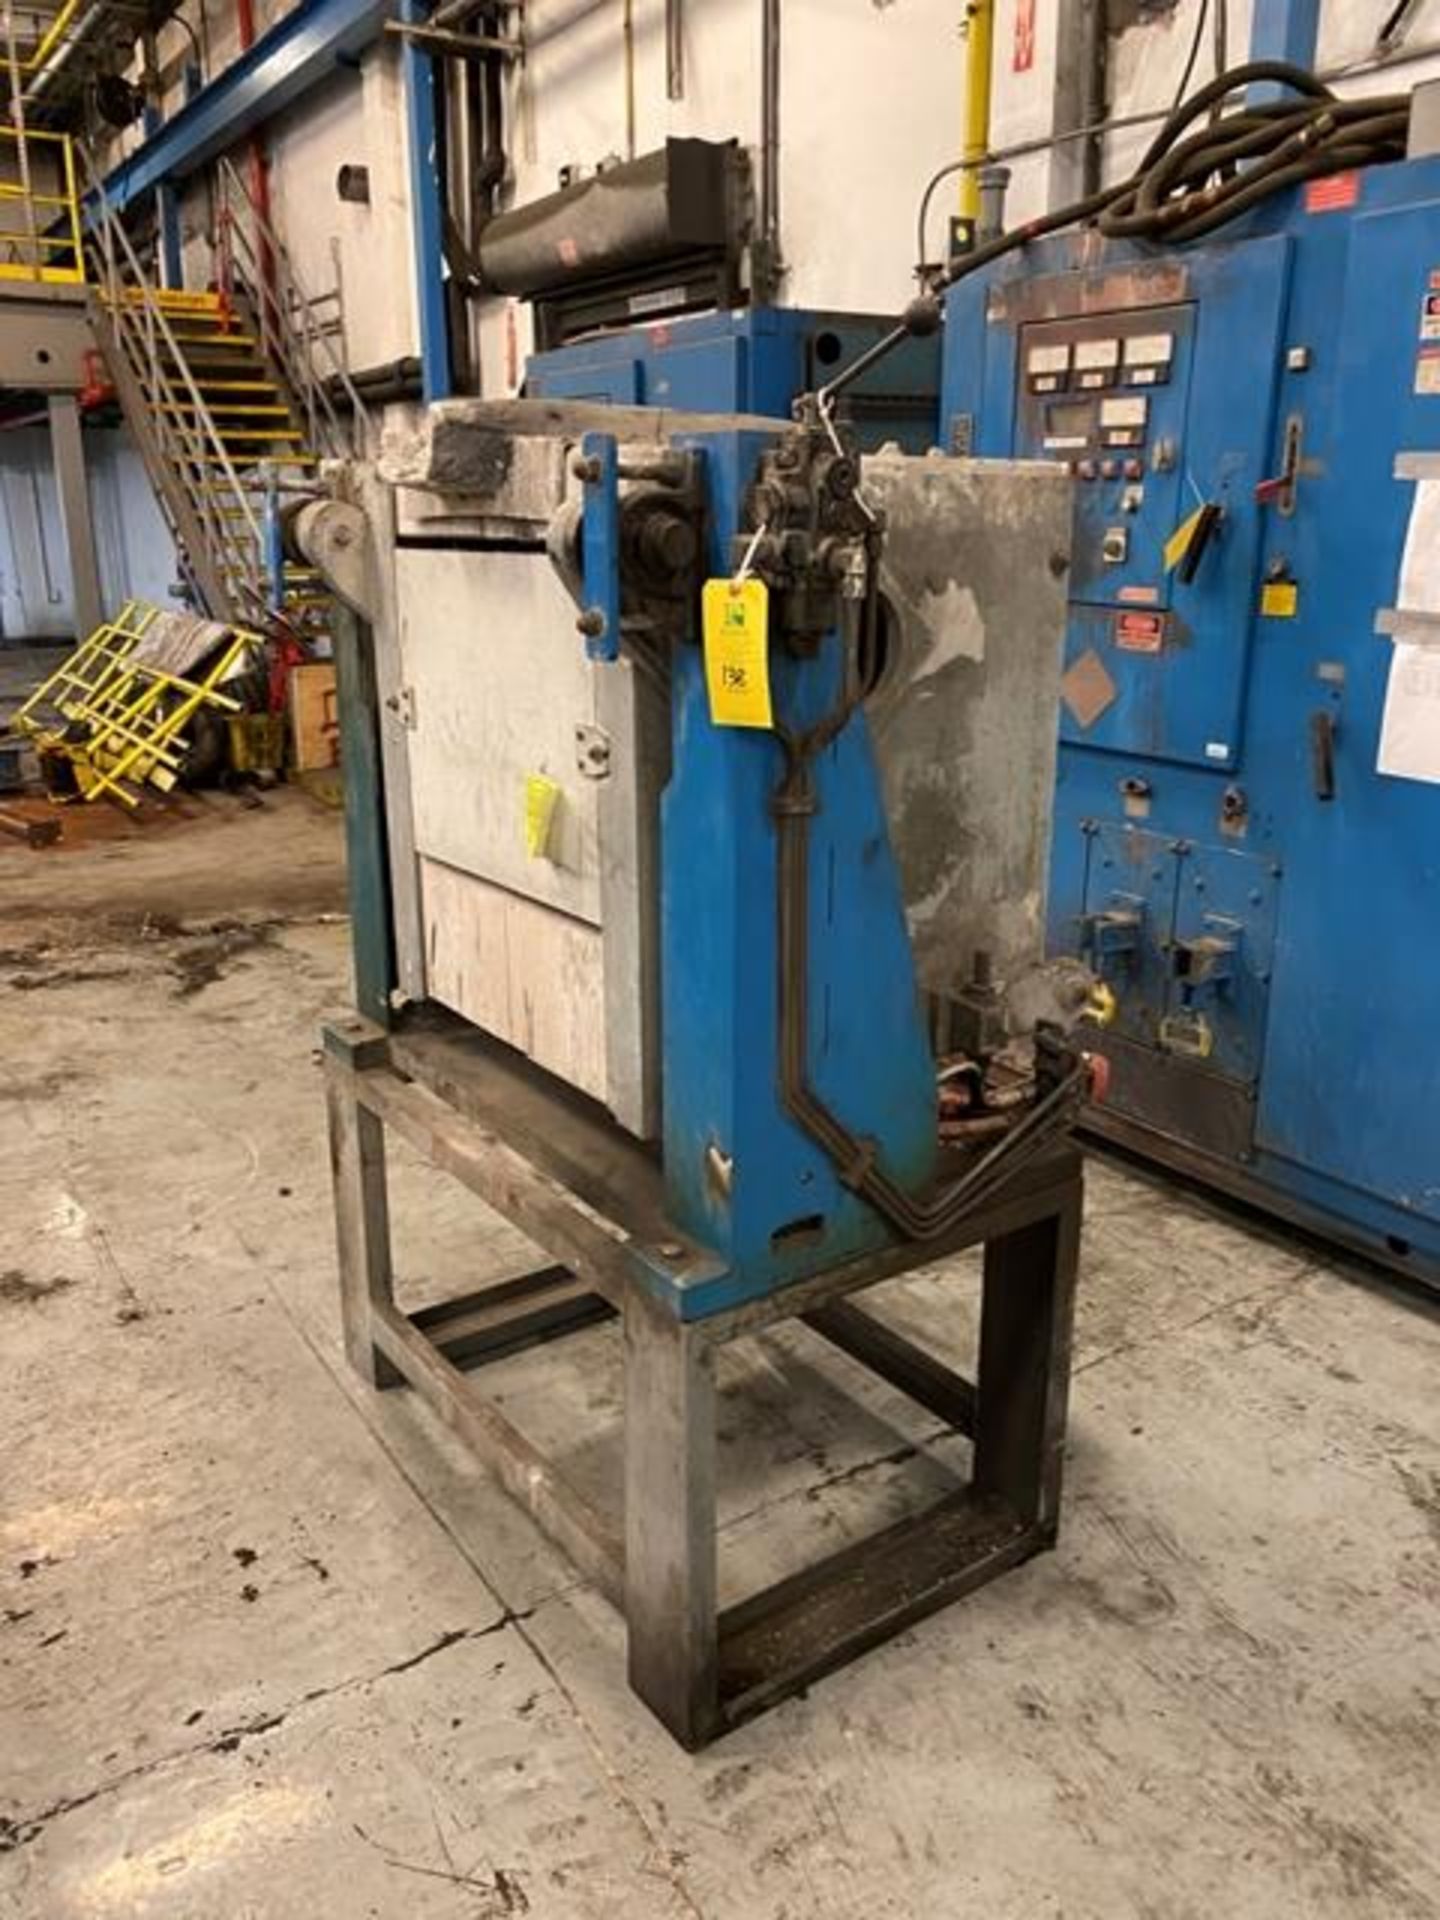 ITC Induction Furnace Rigging Price $175